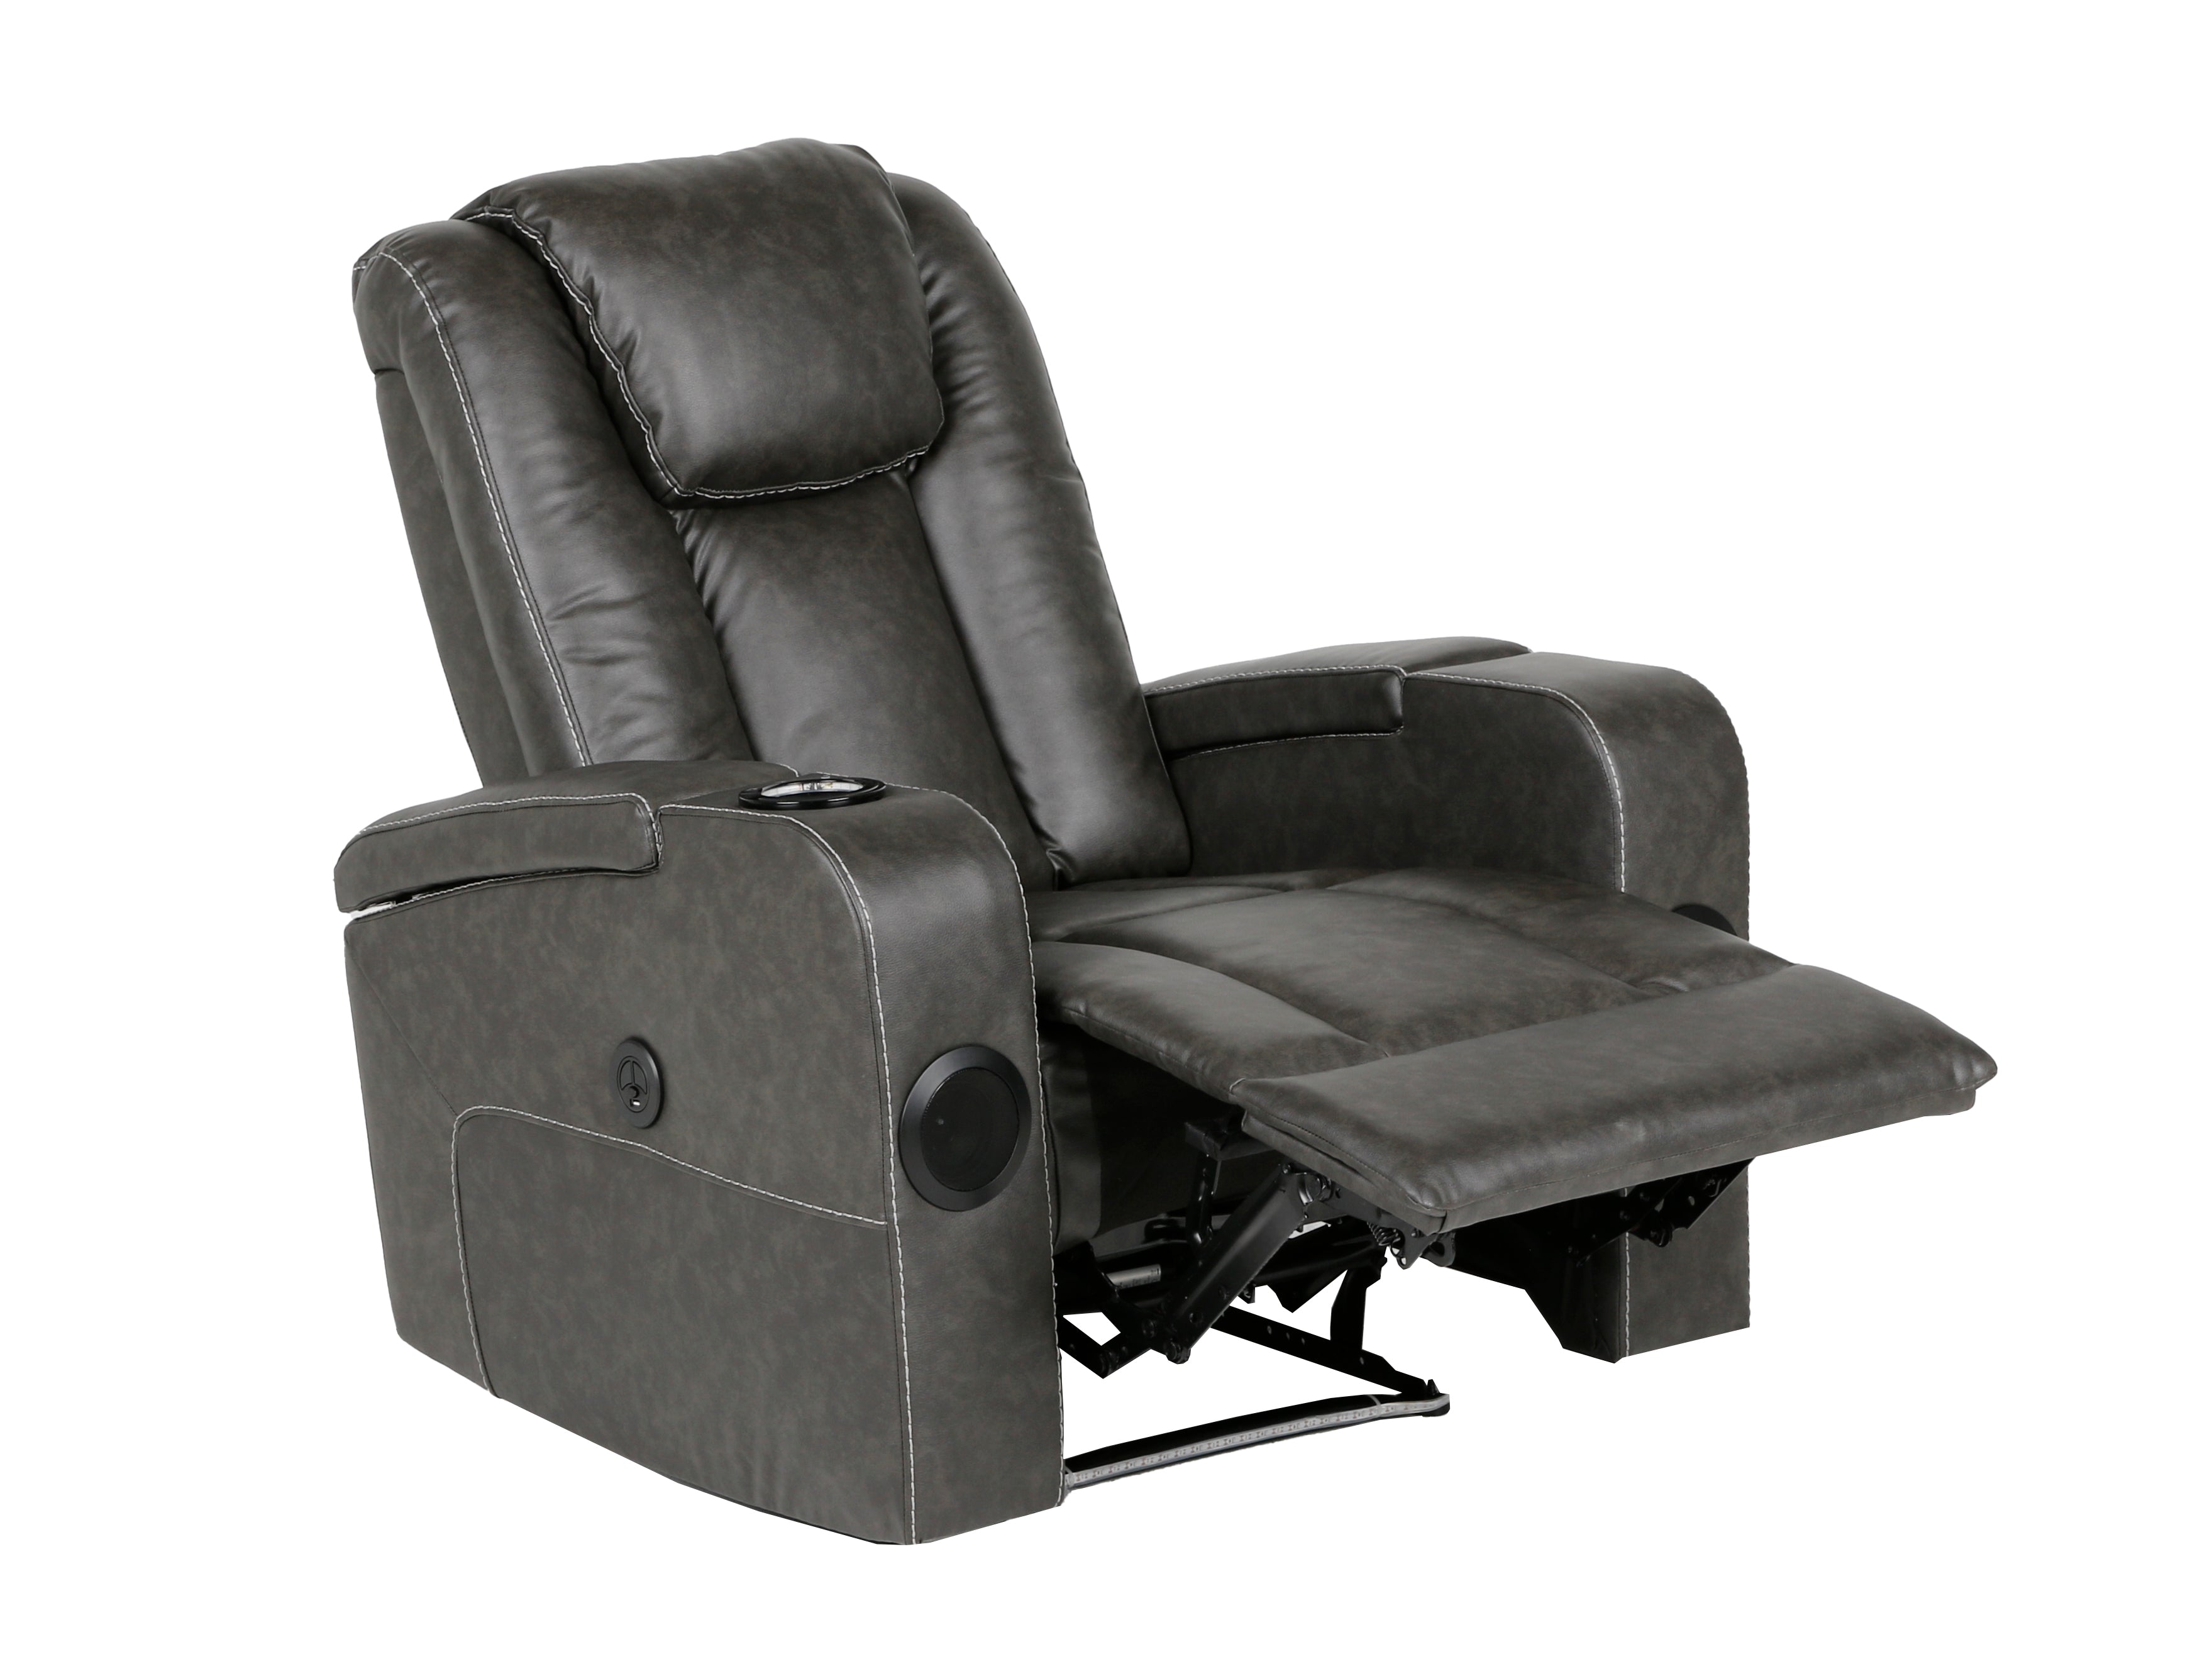 POWER RECLINING CHAIR WITH BLUETOOTH SPEAKERS